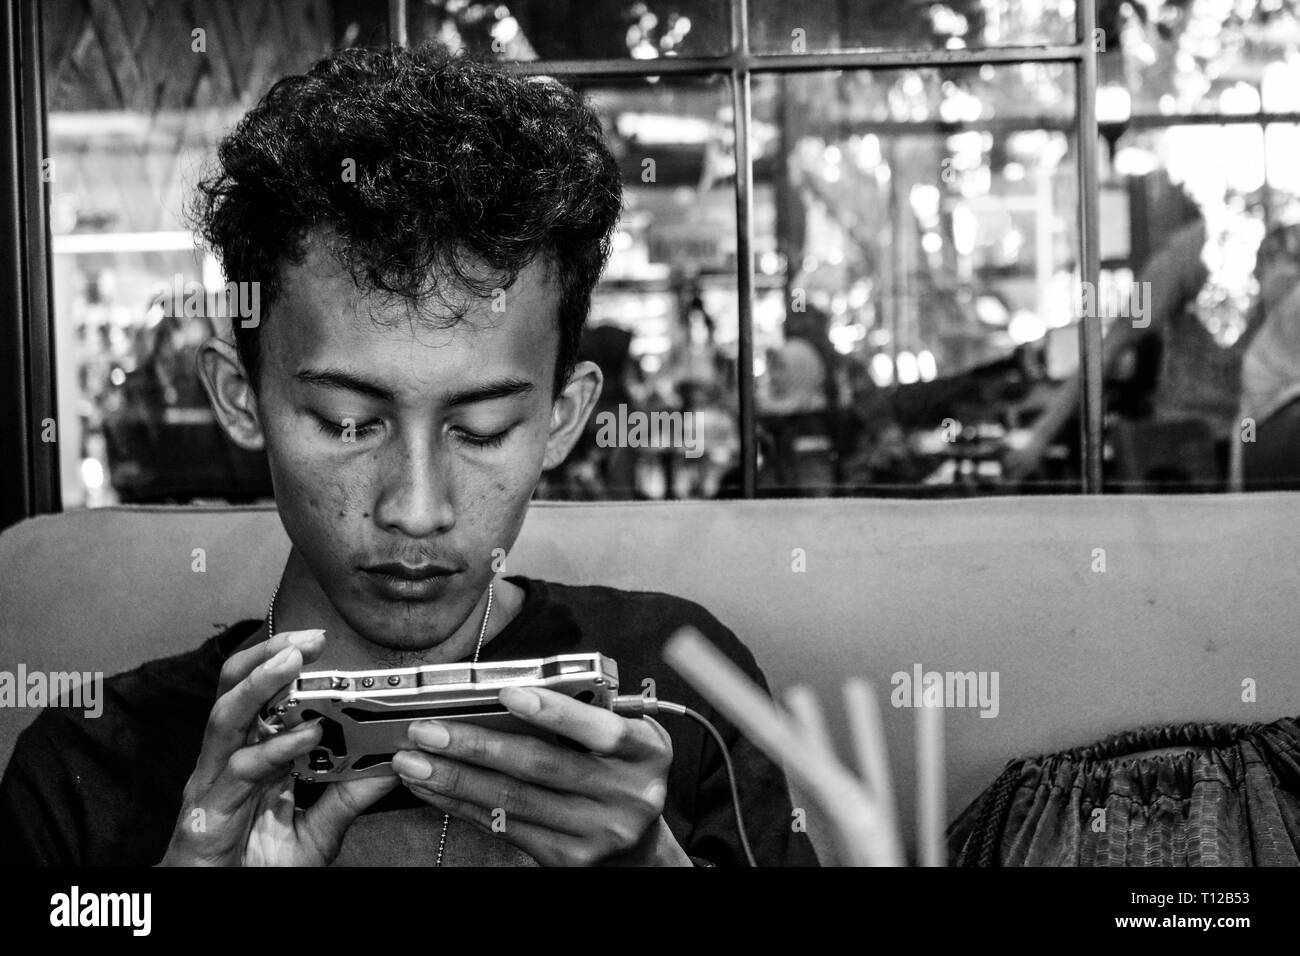 A teenager is playing a game on his cellphone Stock Photo